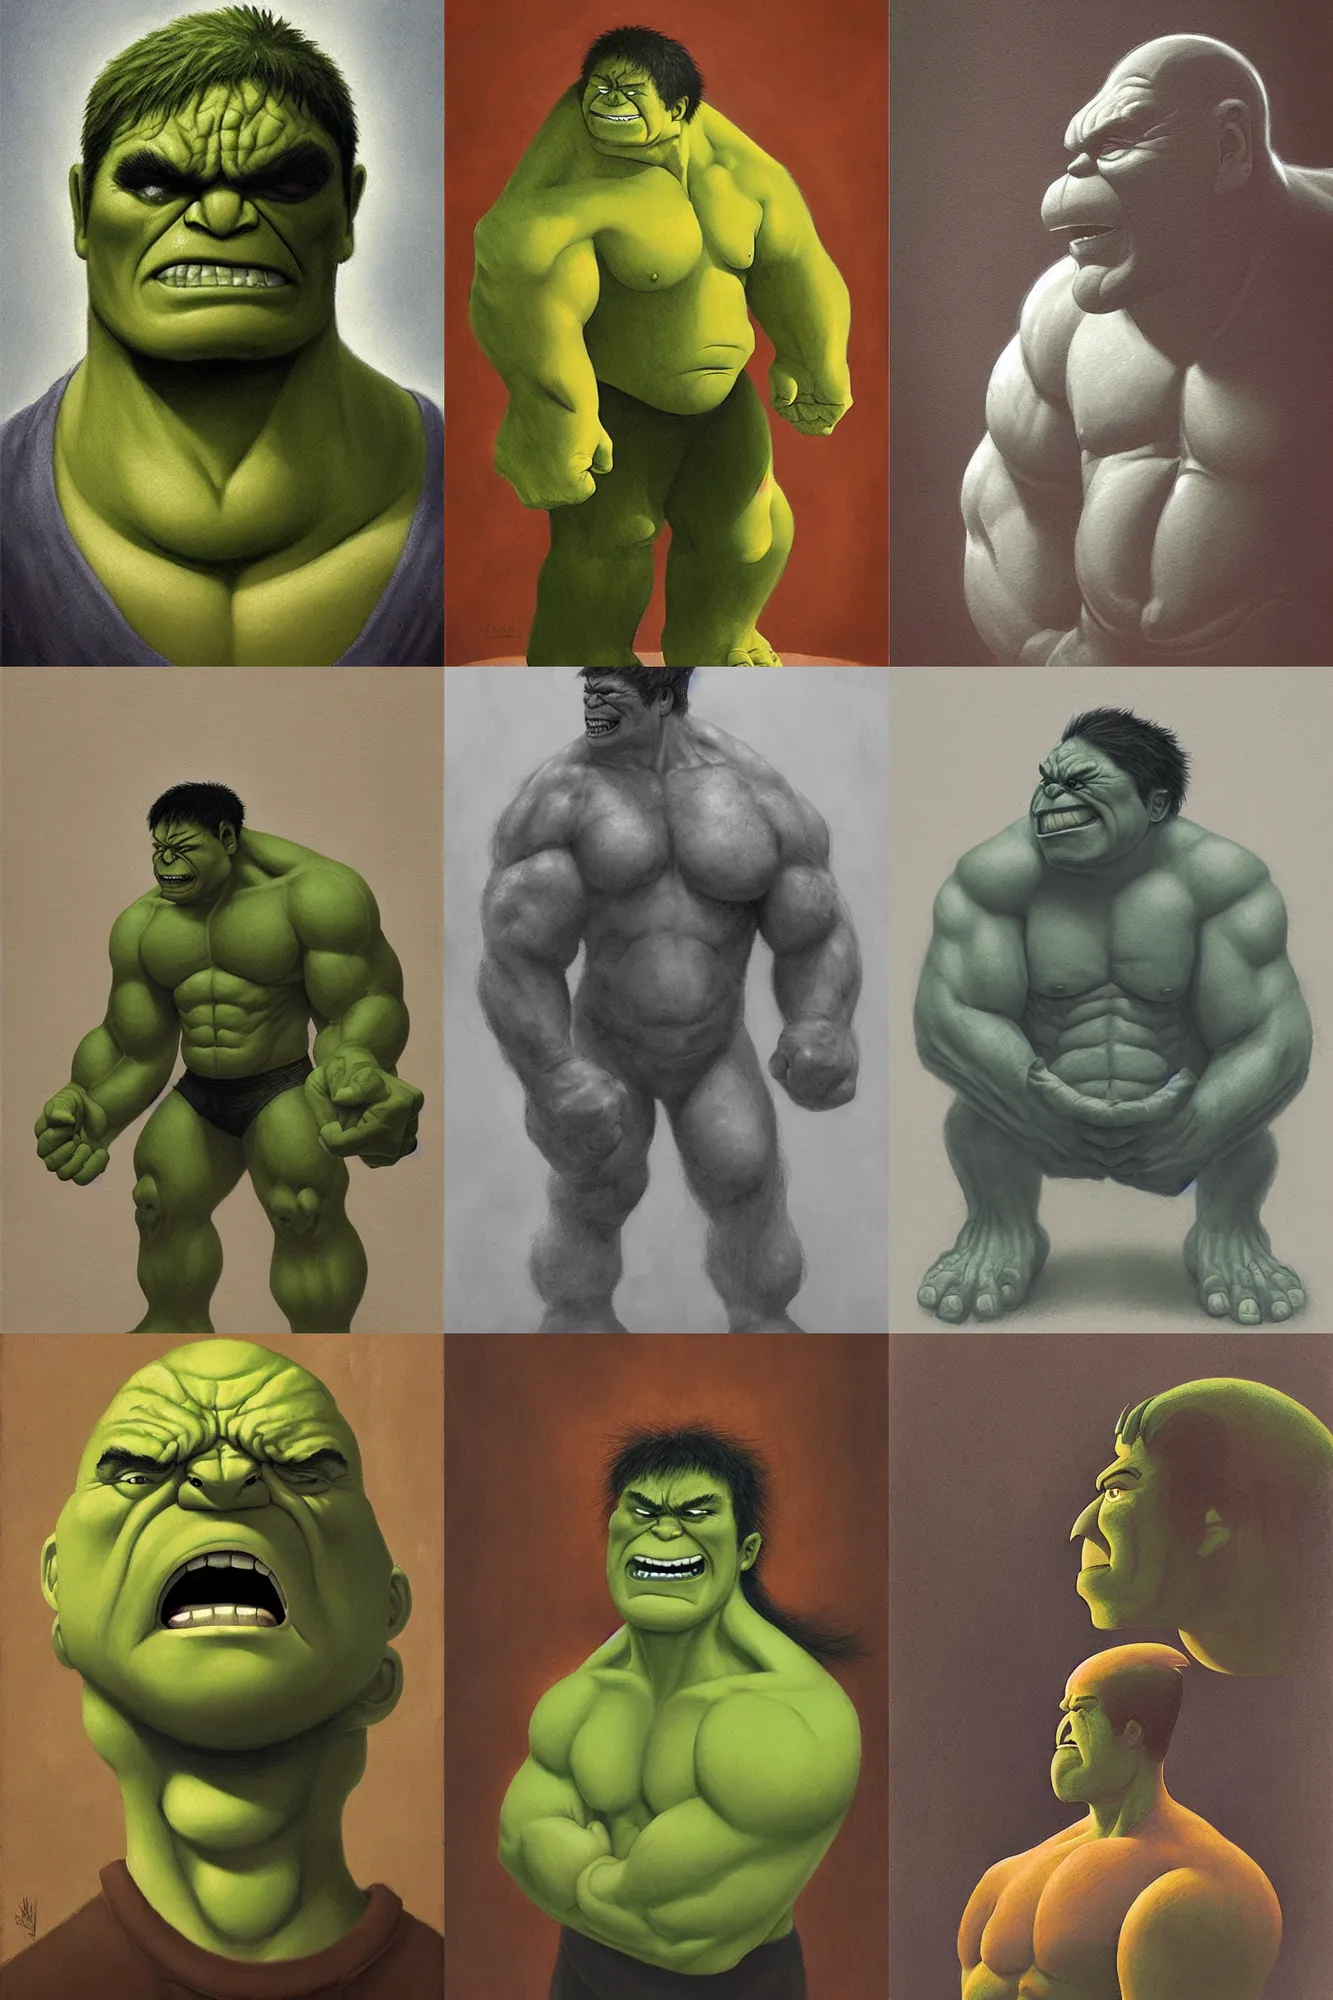 Prompt: candid portrait of Hulk illustrated by Shaun Tan